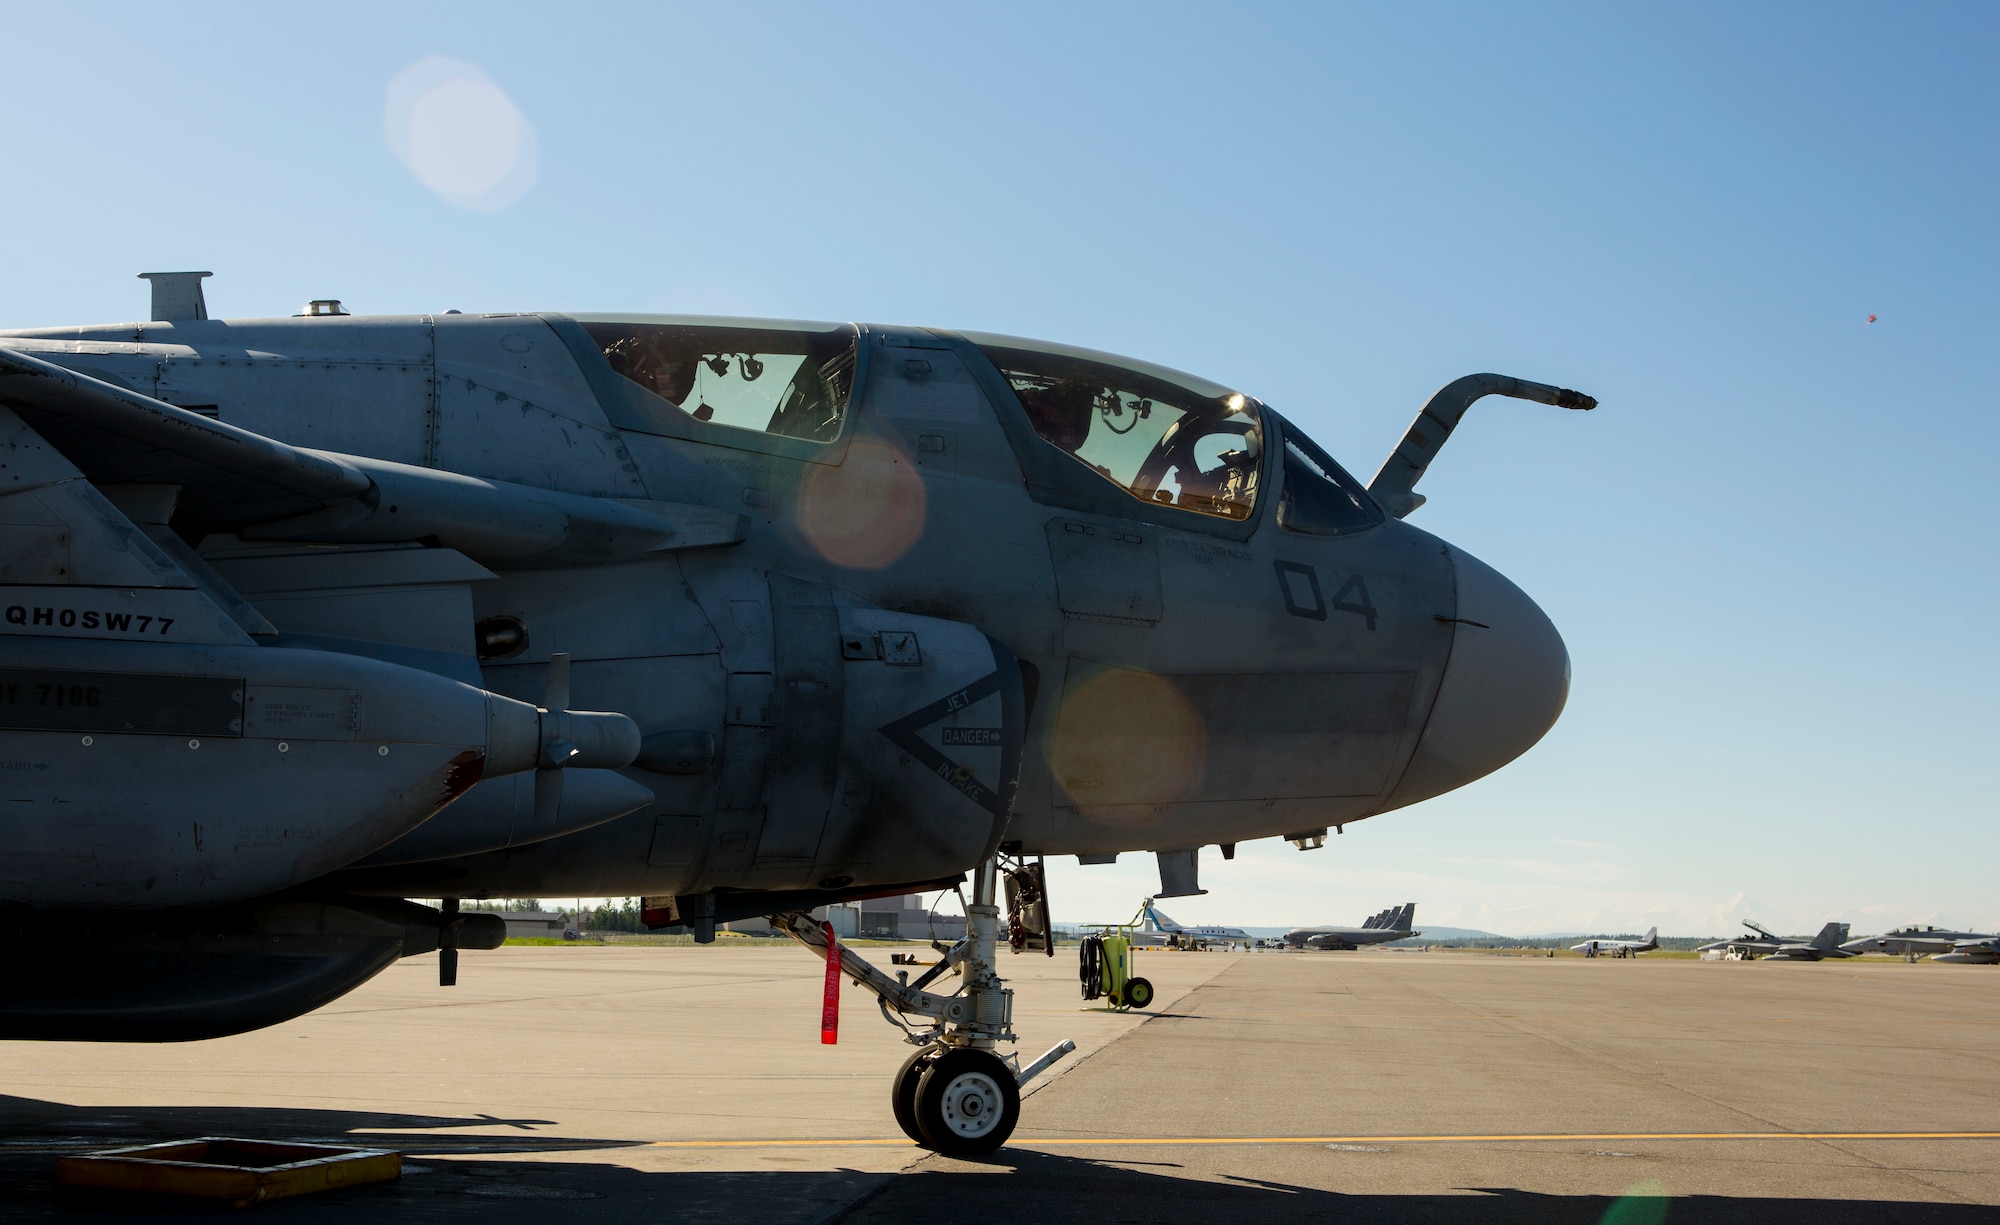 A U.S. Marine Corps EA-6B Prowler with Marine Tactical Electronic Warfare Squadron 2, 2nd Marine Aircraft Wing sits on the flight line during Exercise Northern Edge 15 at Eielson Air Force Base, Alaska, June 15, 2015. Northern Edge is Alaska’s premier joint training exercise designed to practice operations, techniques and procedures as well as enhance interoperability among the services. Thousands of participants from all services, Airmen, Soldiers, Sailors, Marines and Coast Guardsmen from active duty, Reserve and National Guard units are involved. (U.S. Marine Corps photo by Cpl. Suzanne Dickson/Released)